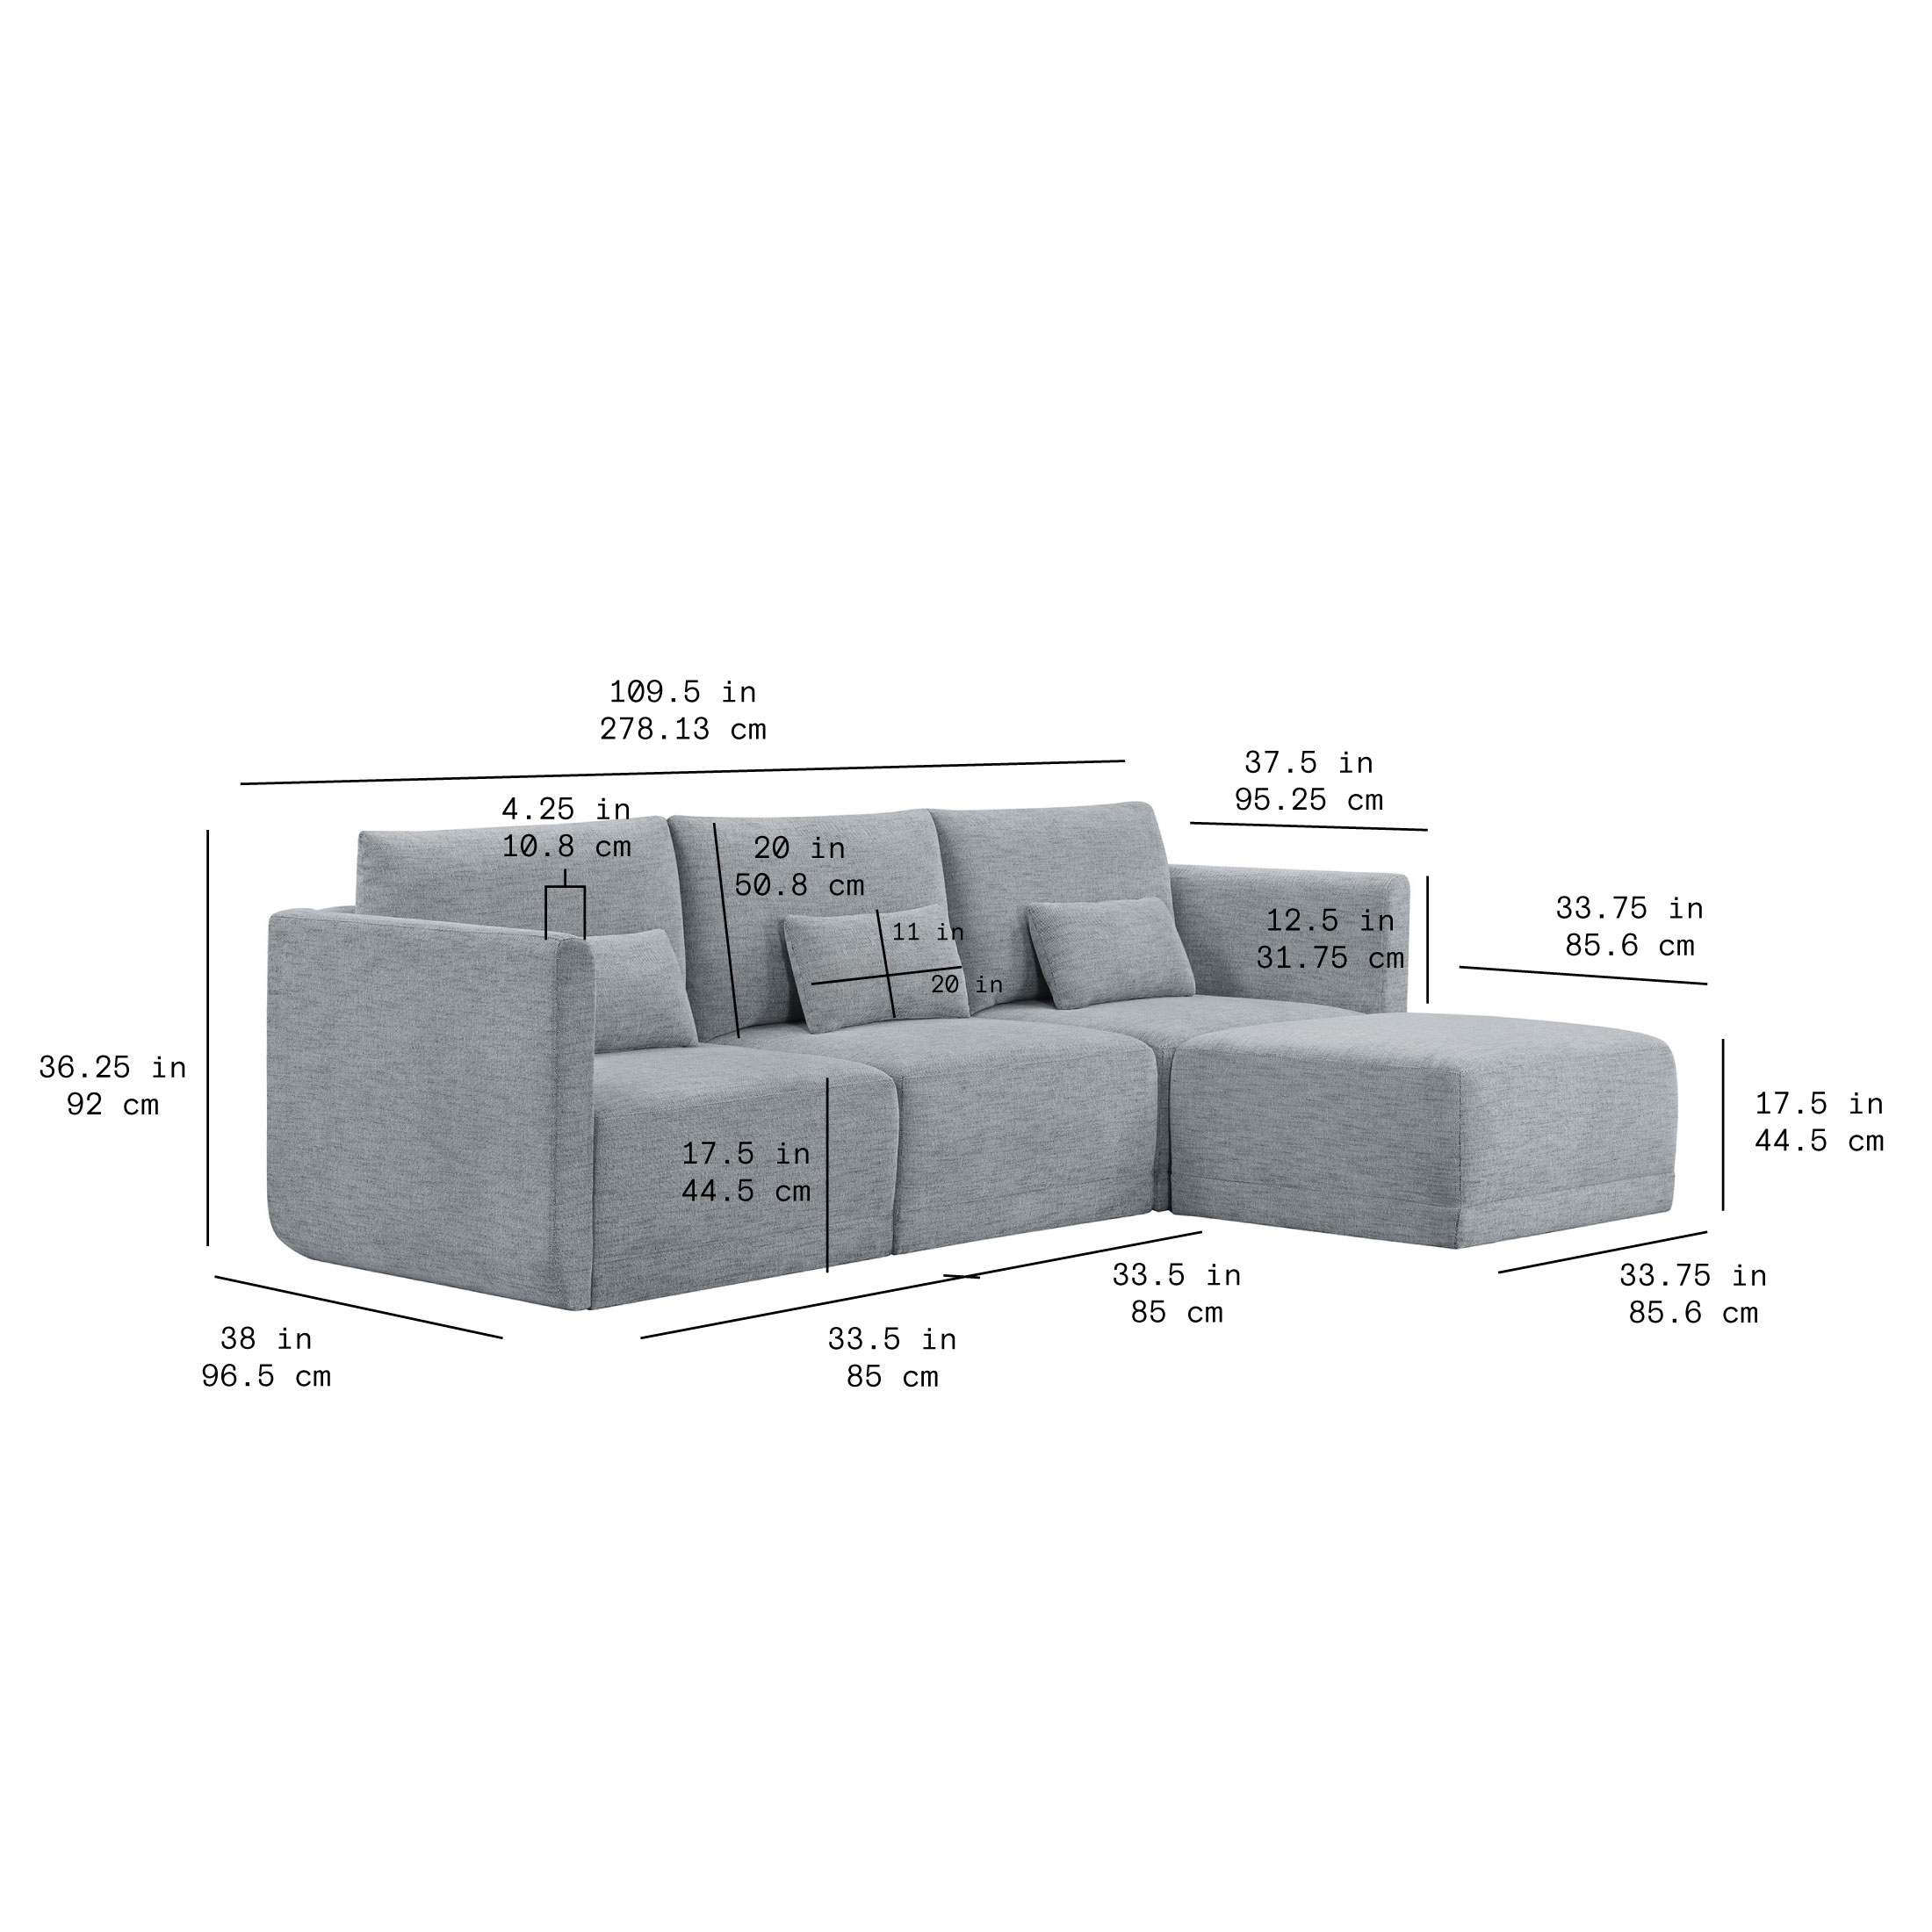 Beautiful Drew Modular Sectional Sofa with Ottoman by Drew Barrymore, Gray Fabric - image 5 of 15